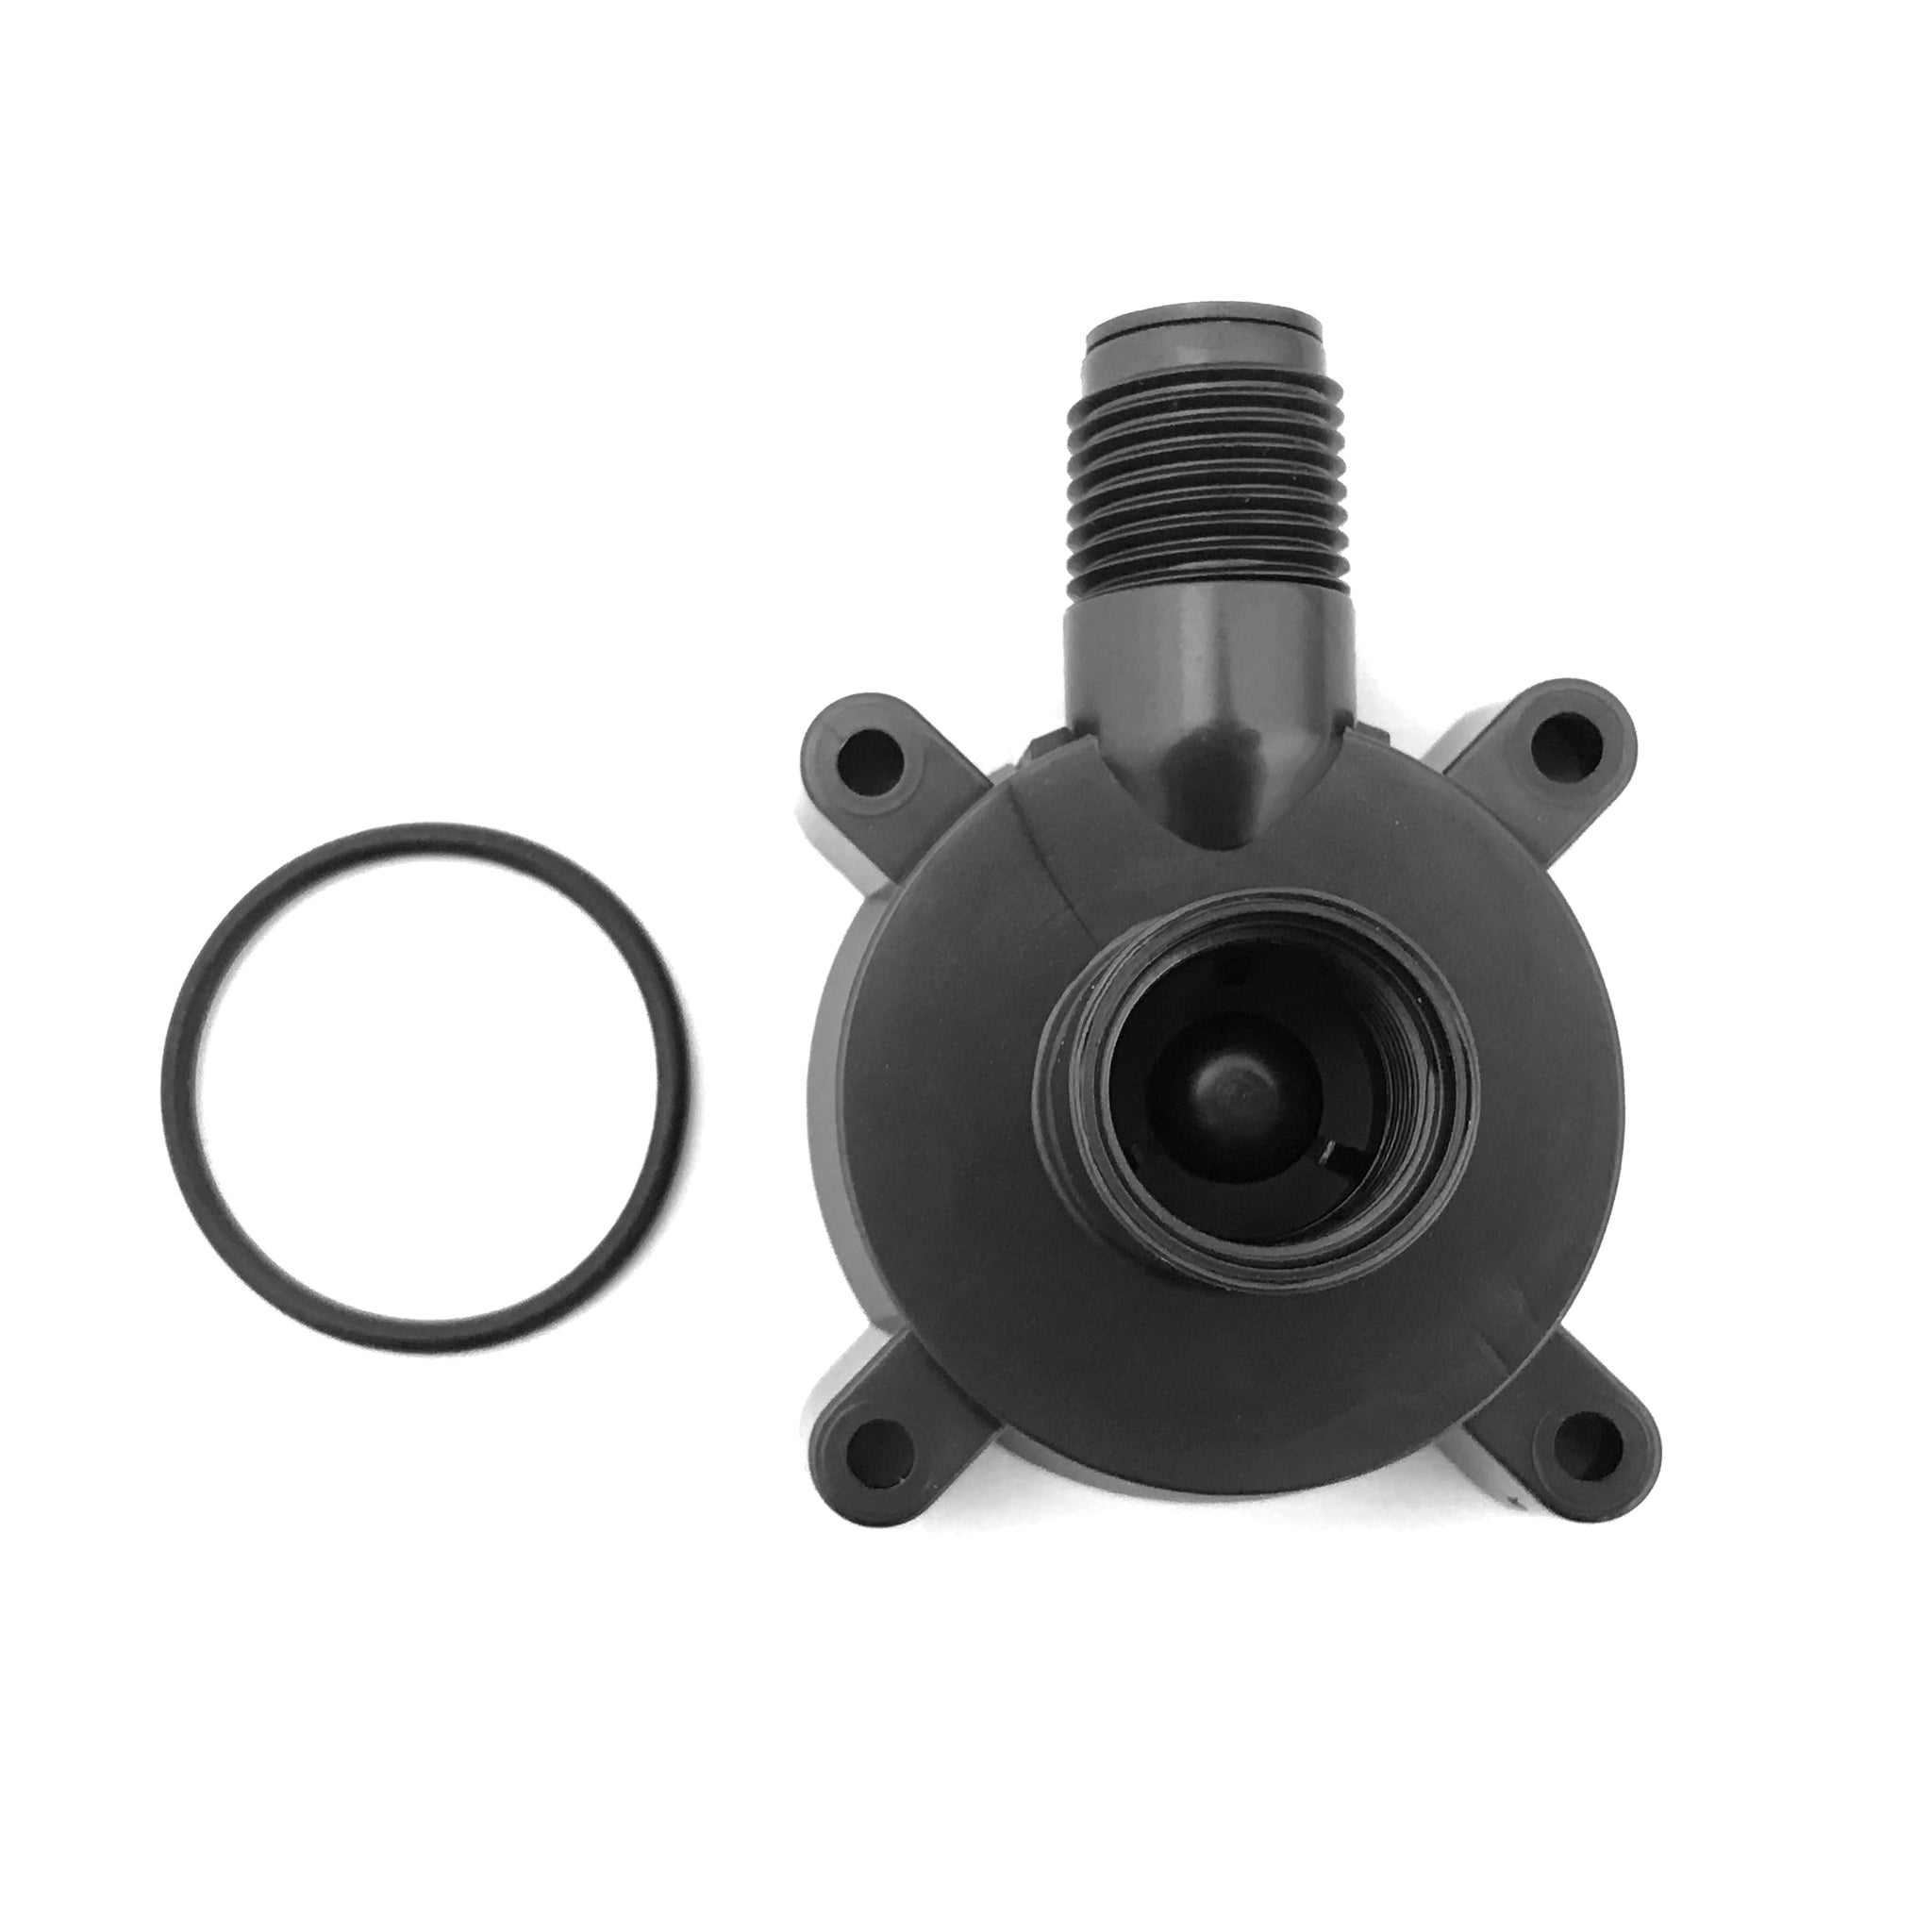 Replacement Pump Cover/Volute Threaded Intake for 250GPH and 350GPH Pumps